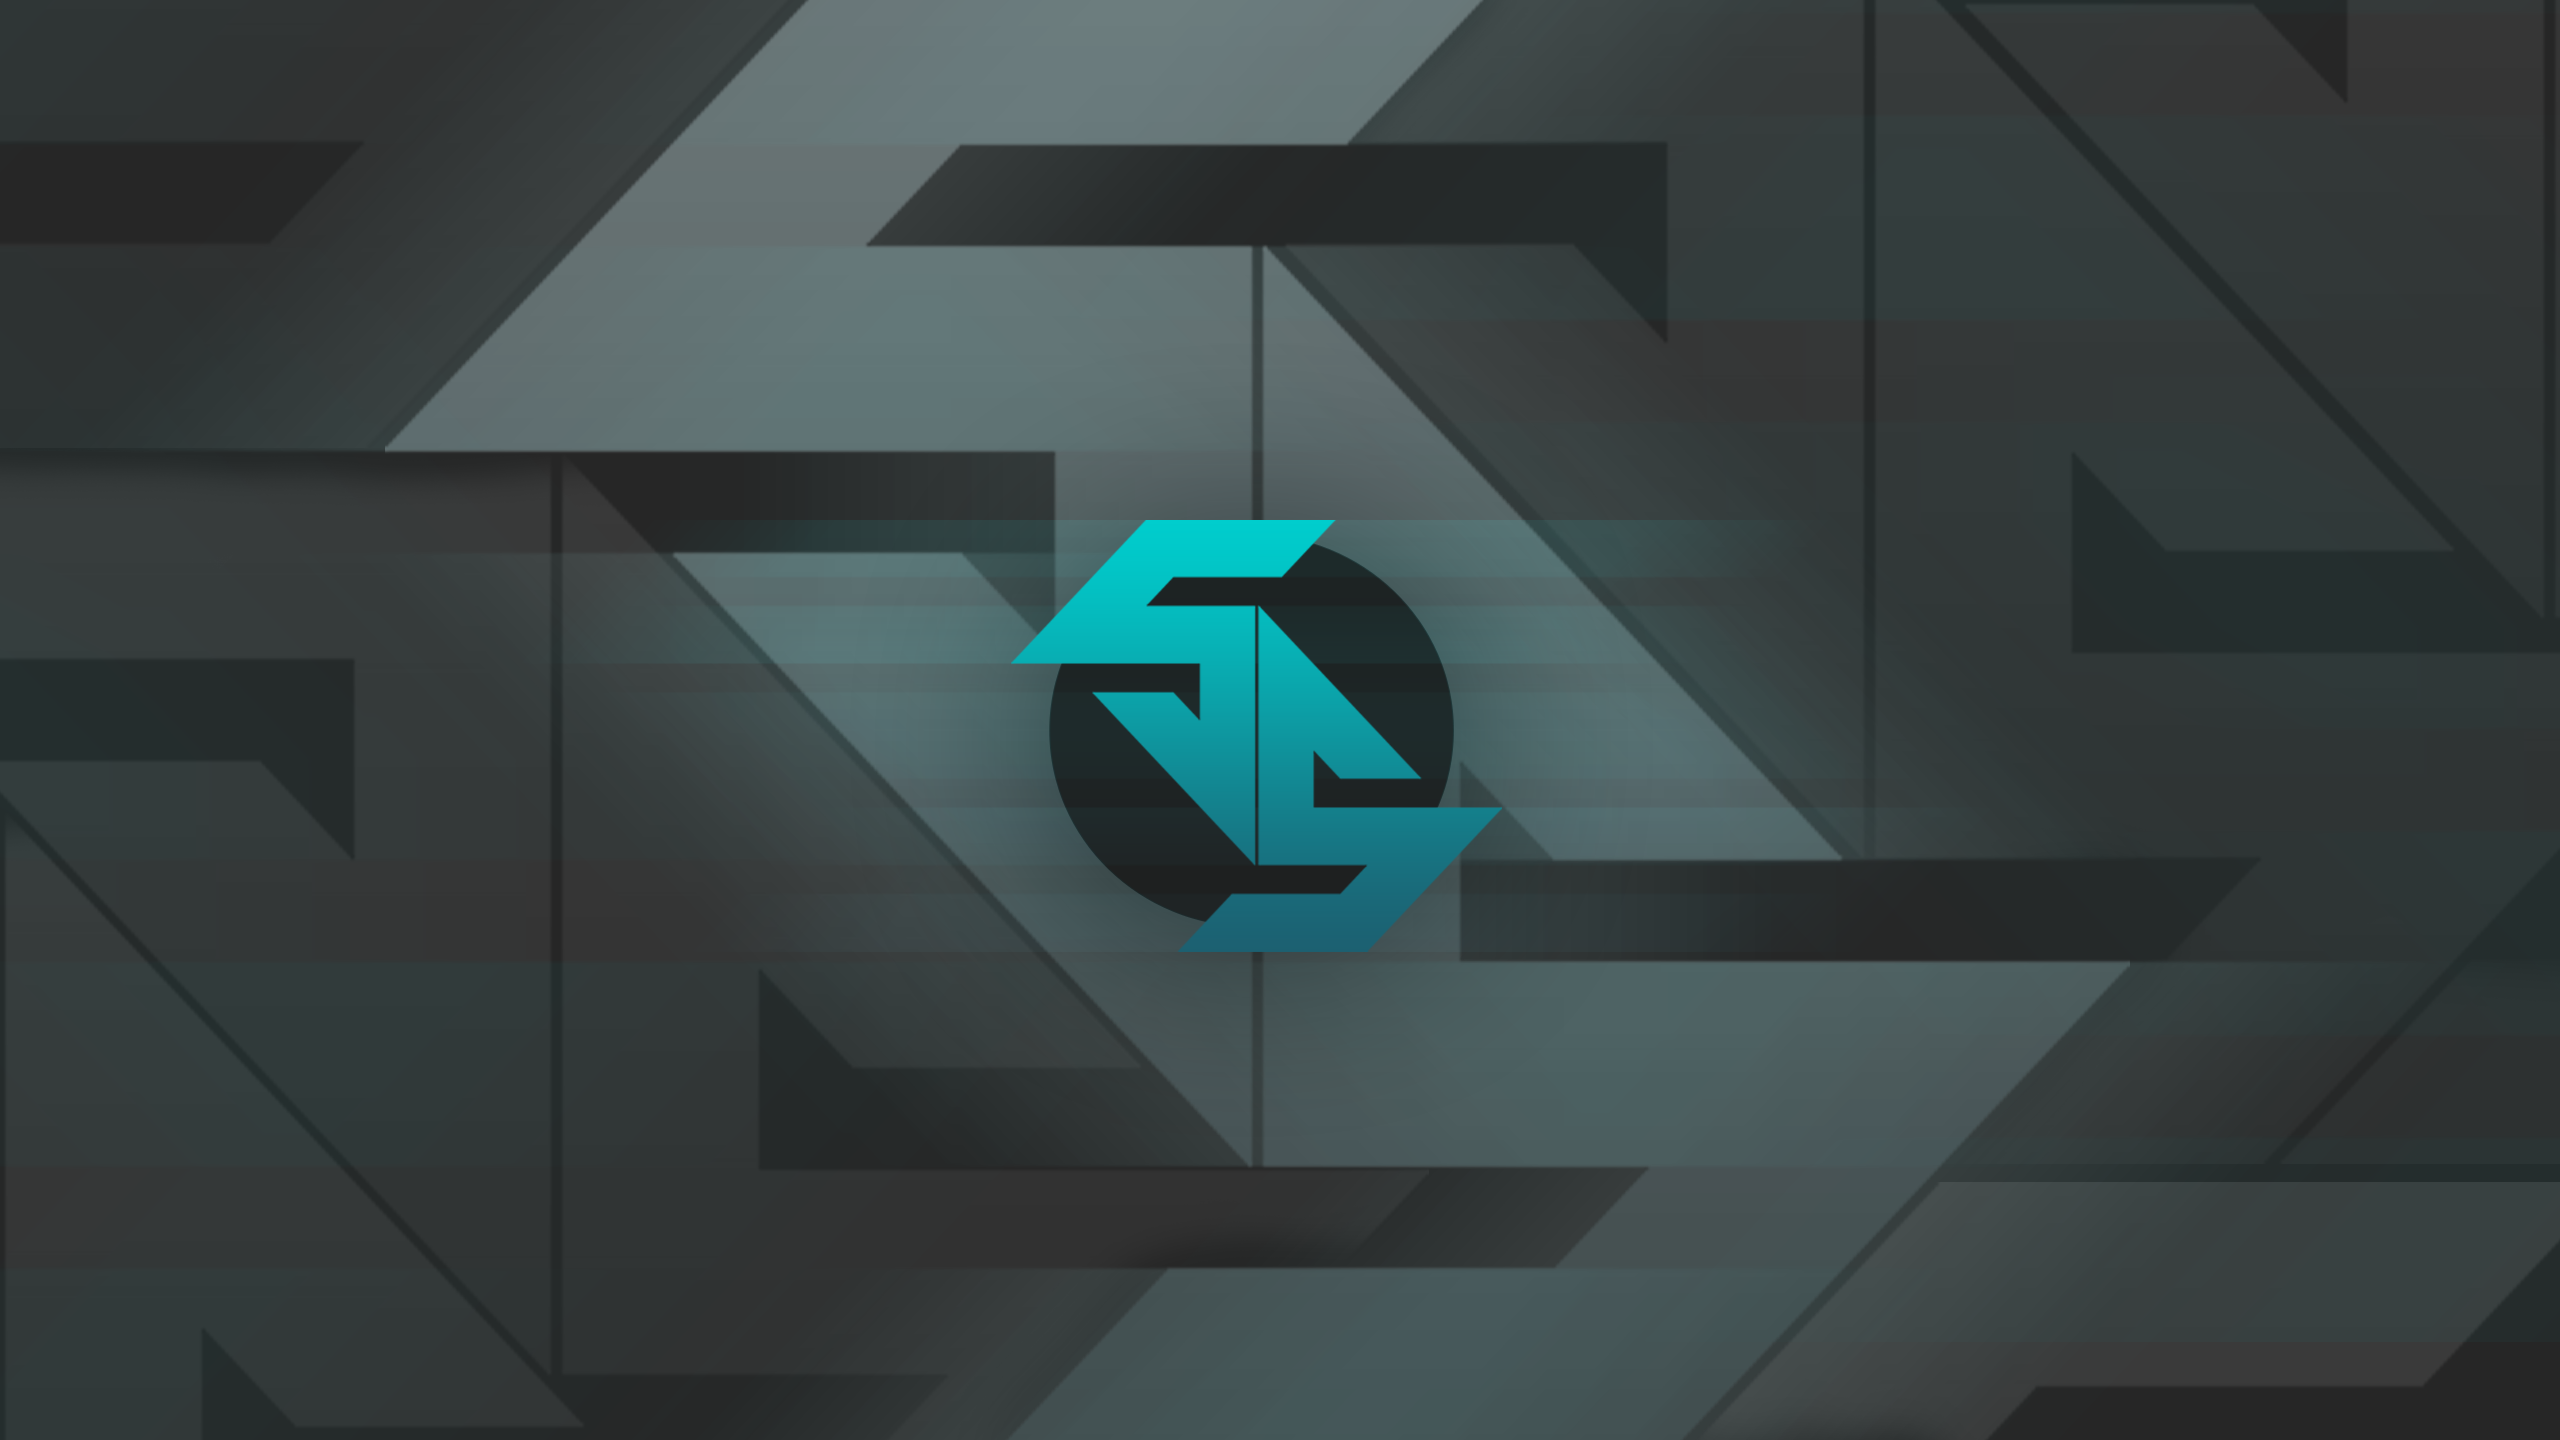 General 2560x1440 Counter-Strike: Global Offensive spes salutis cyan gray background PC gaming